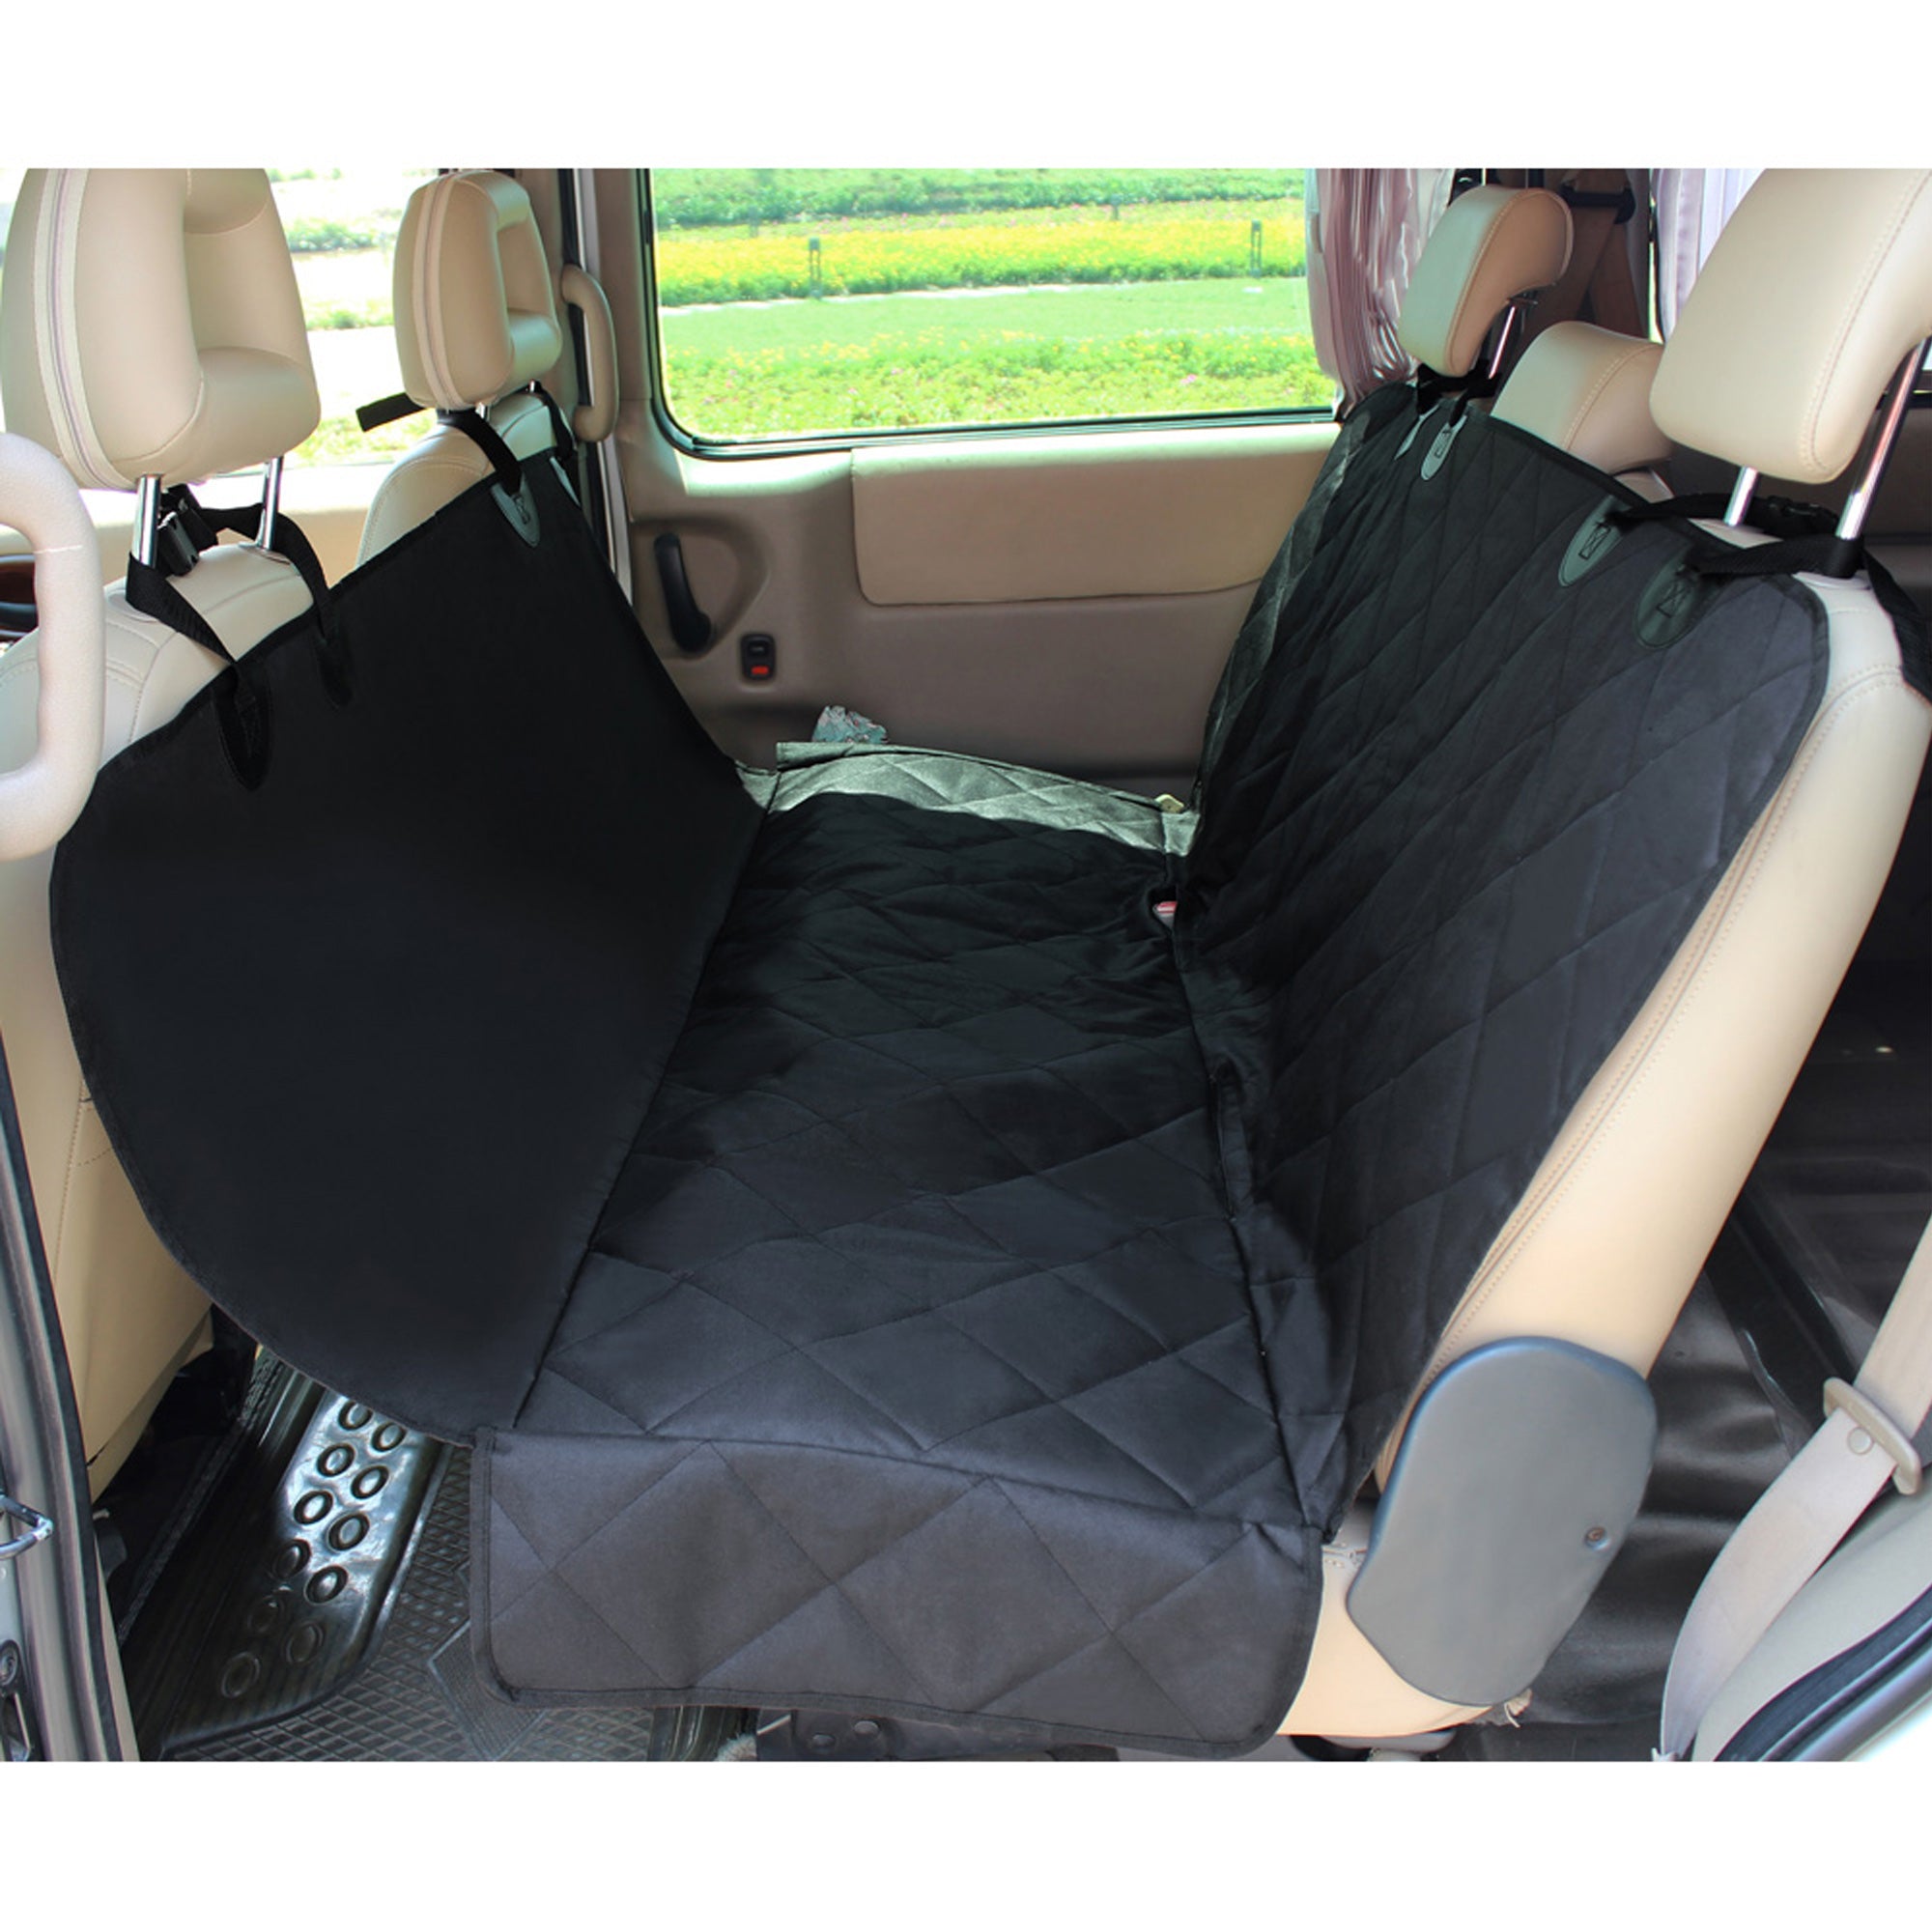 Jespet Luxury Travel Dog Back Car Seat Cover, Fits for Car SUV Truck